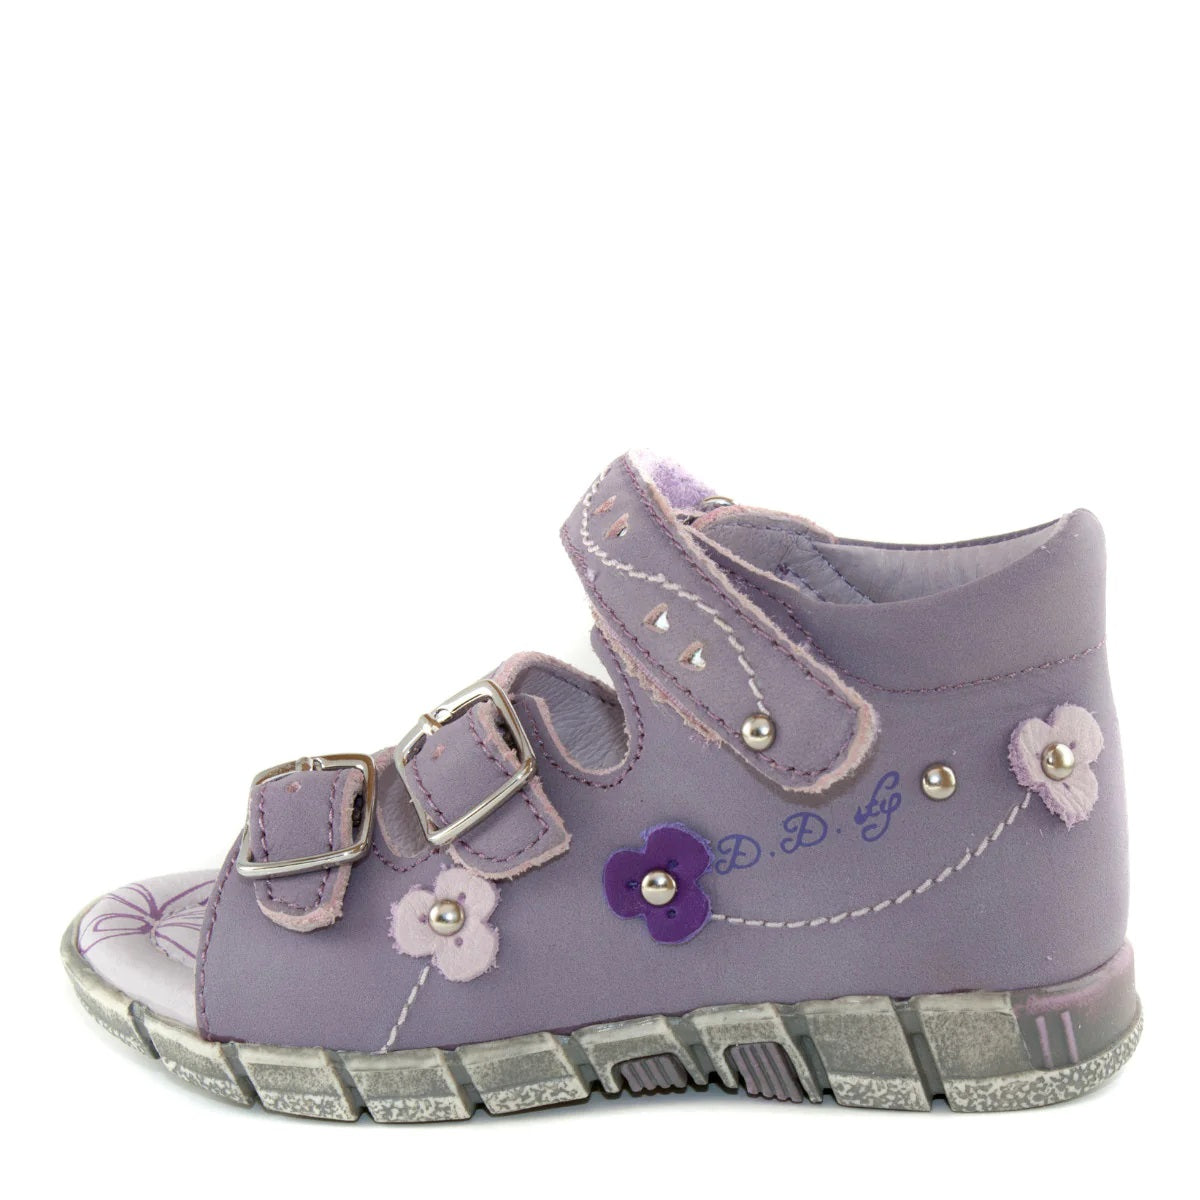 Premium quality first walker sandals with genuine leather lining and upper in violet color and flower decor. Thanks to its high level of specialization, D.D. Step knows exactly what your child’s feet need, to develop properly in the various phases of growth. The exceptional comfort these shoes provide assure the well-being and happiness of your child.